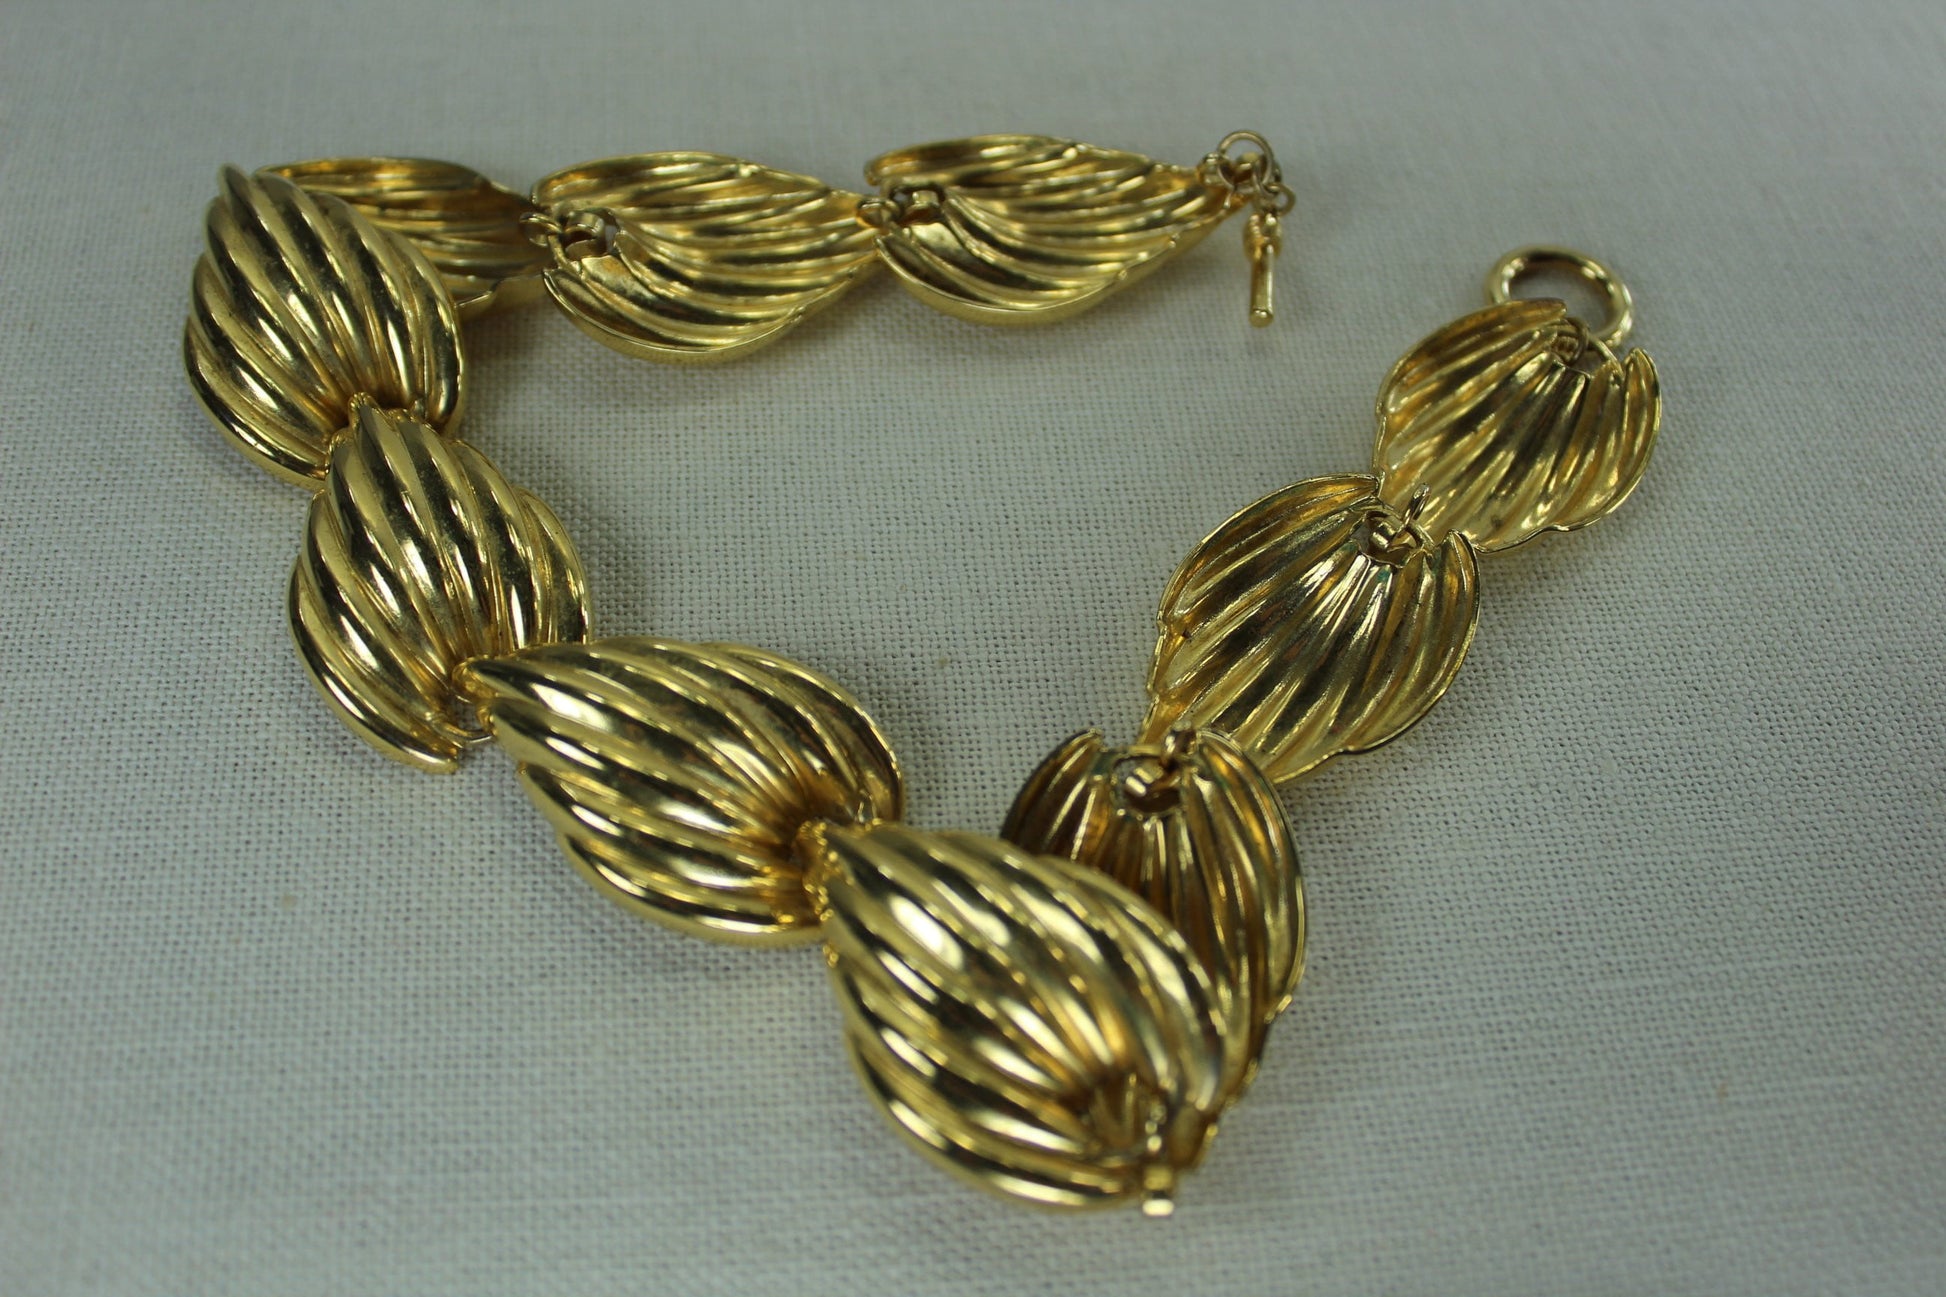 Classic Vintage Choker Gold Metal Leaves Necklace Large Showy Dimensional 1970s showy